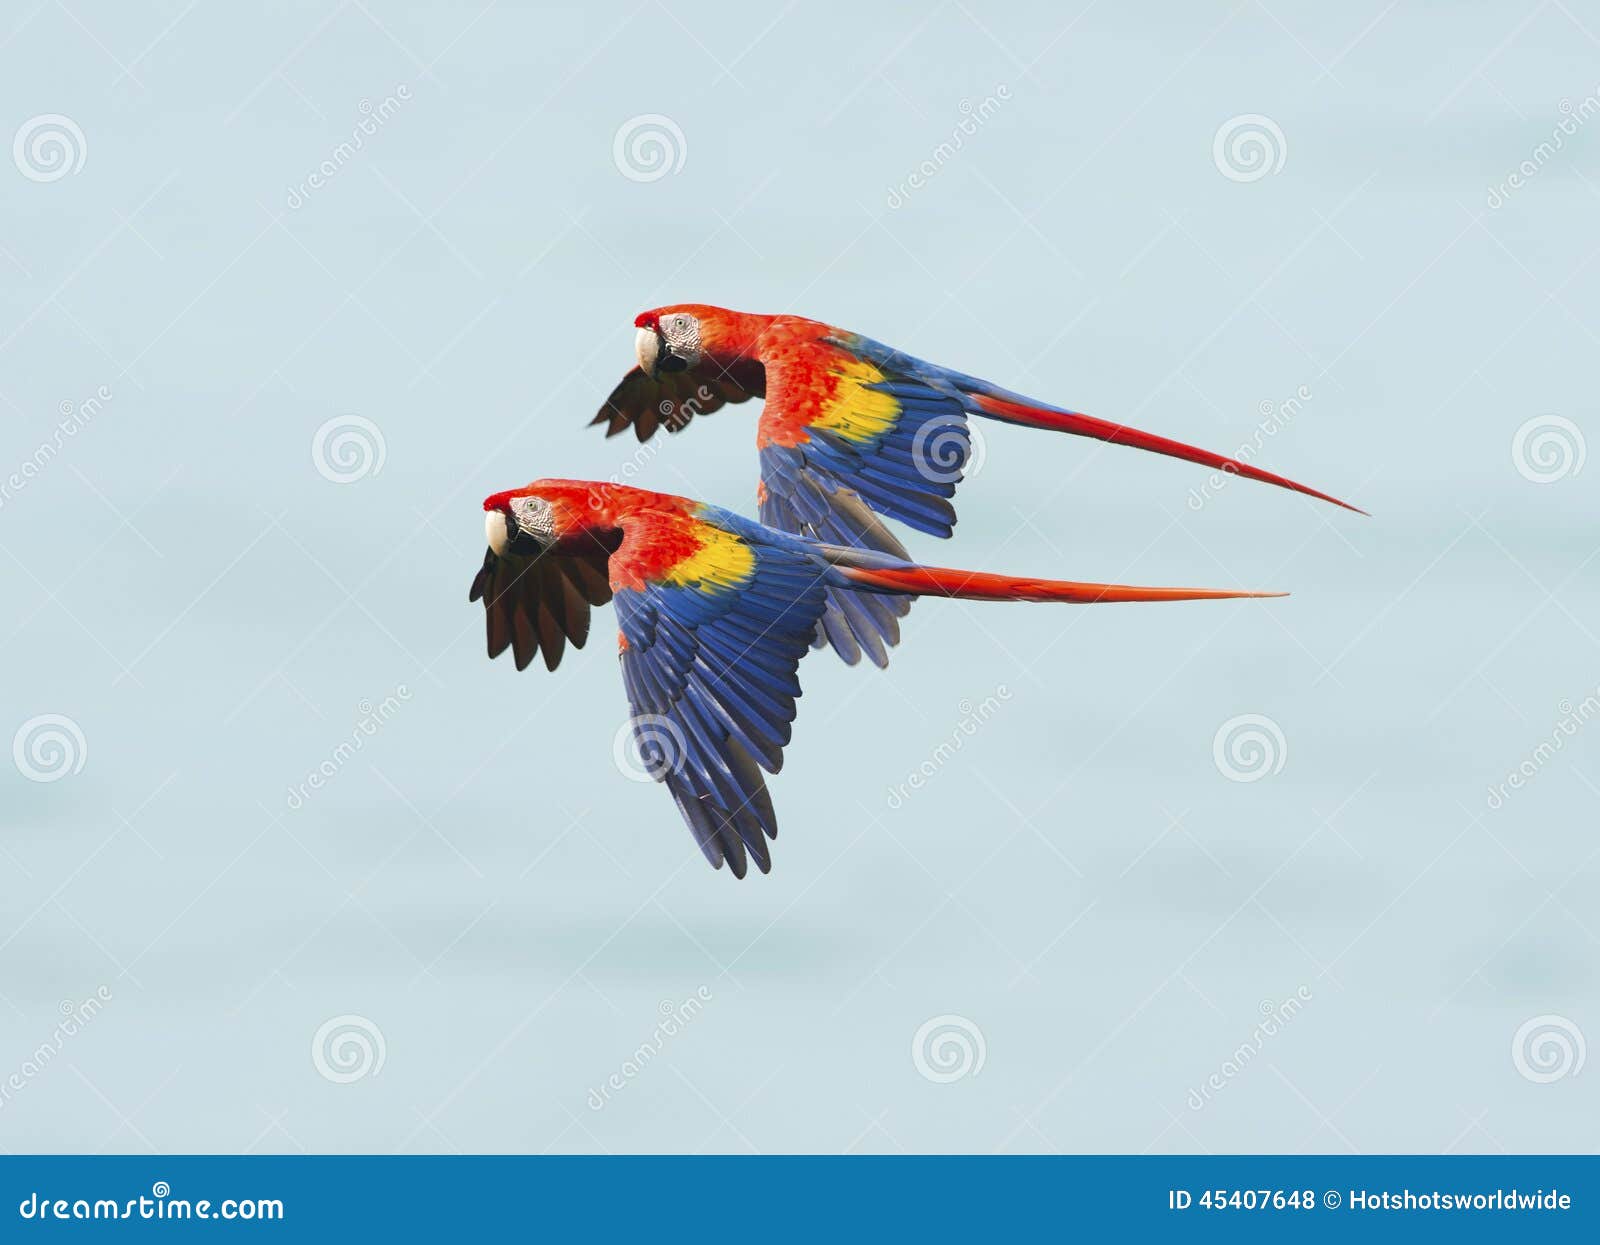 scarlet macaws flying, corcovado nat park, costa rica